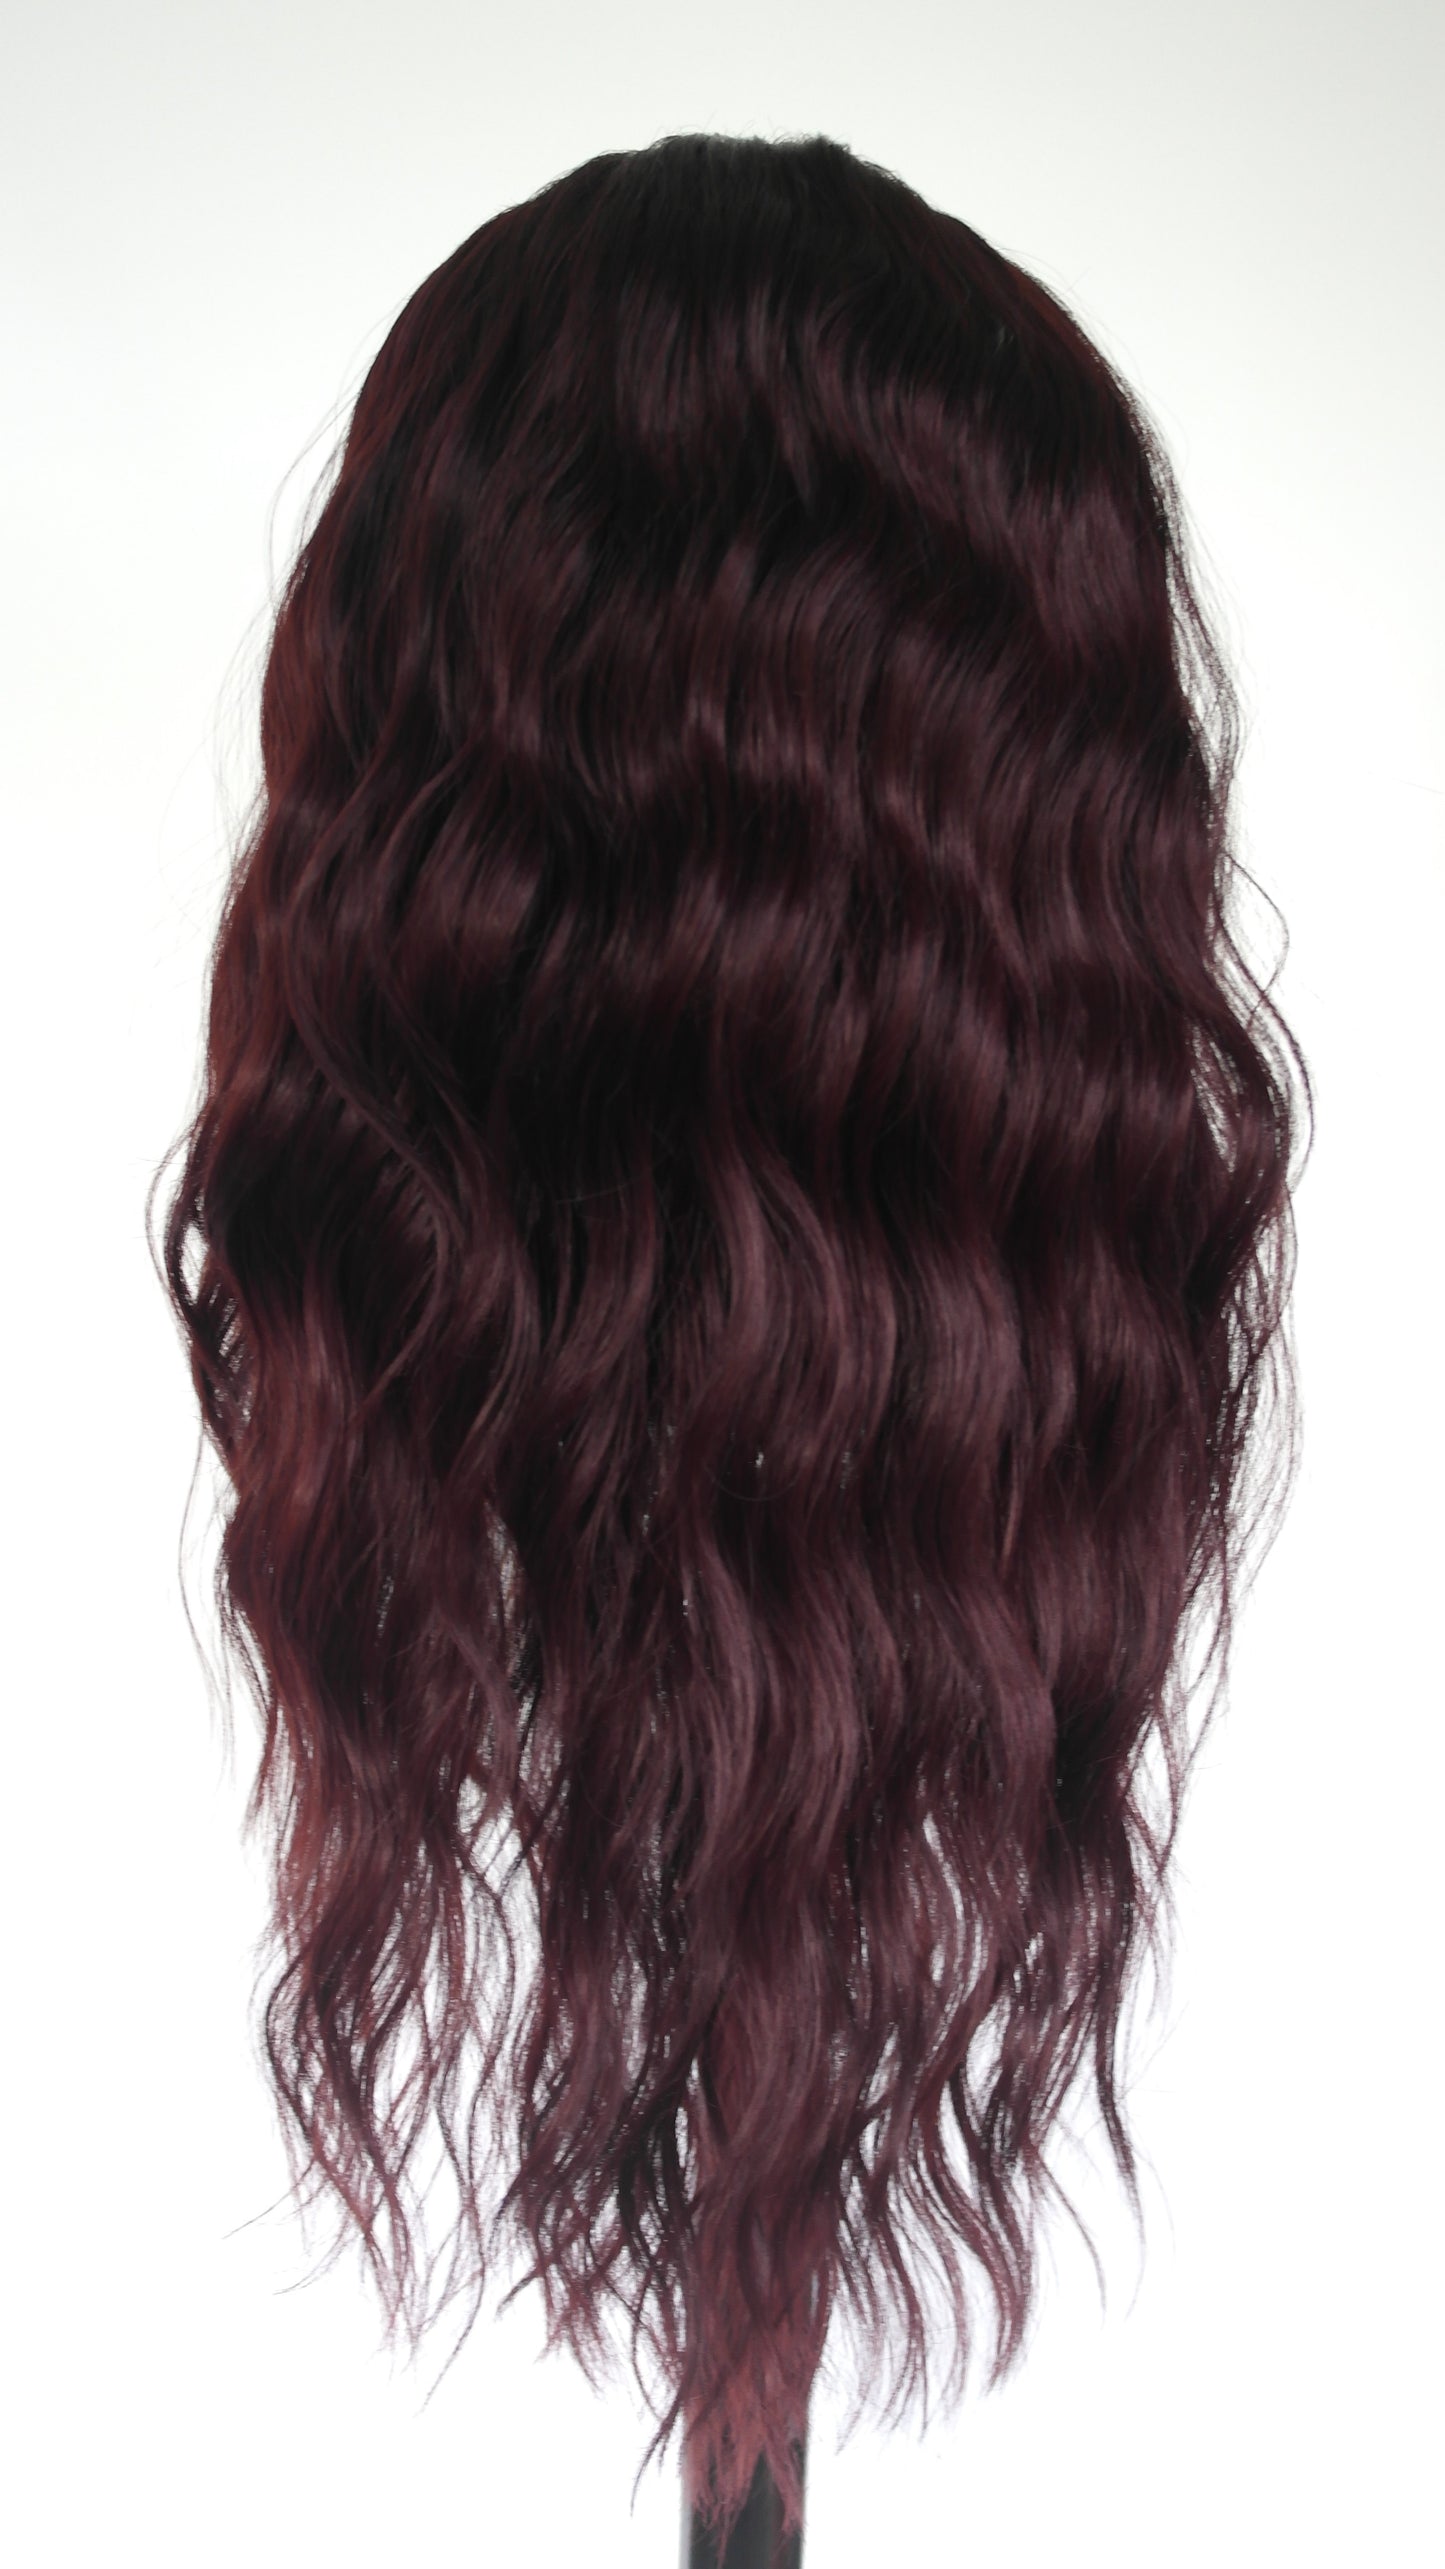 Burgundy Water Wave Lace Front Wig